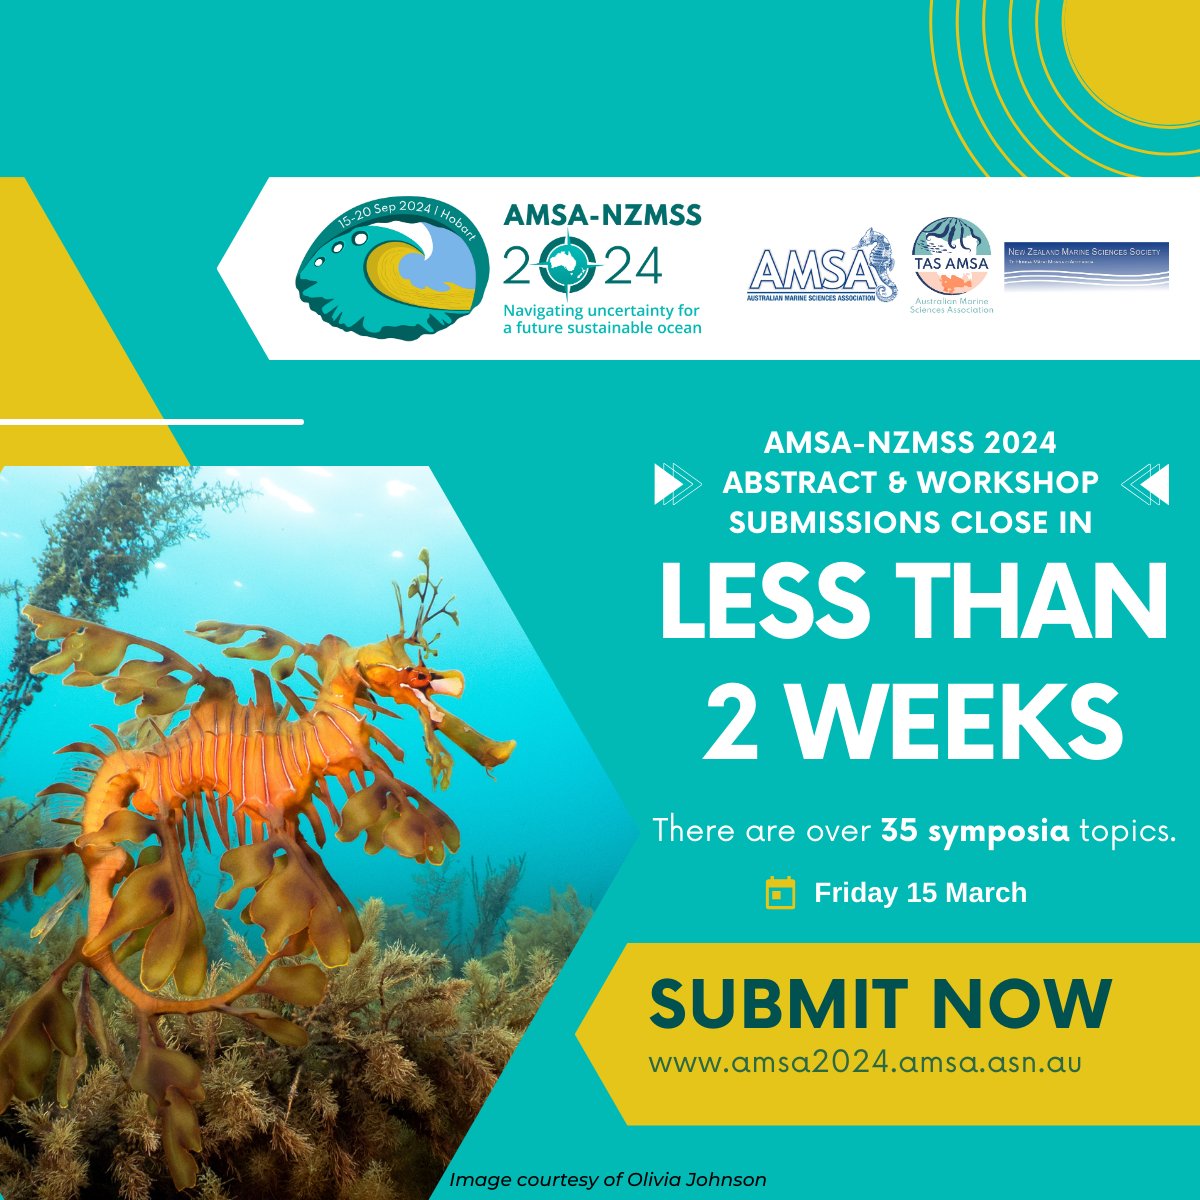 Get your abstract and workshop submissions in now for the upcoming AMSA & NZMSS 2024 Conference in Hobart! Submissions close in less than 2 weeks. Register online amsa2024.amsa.asn.au